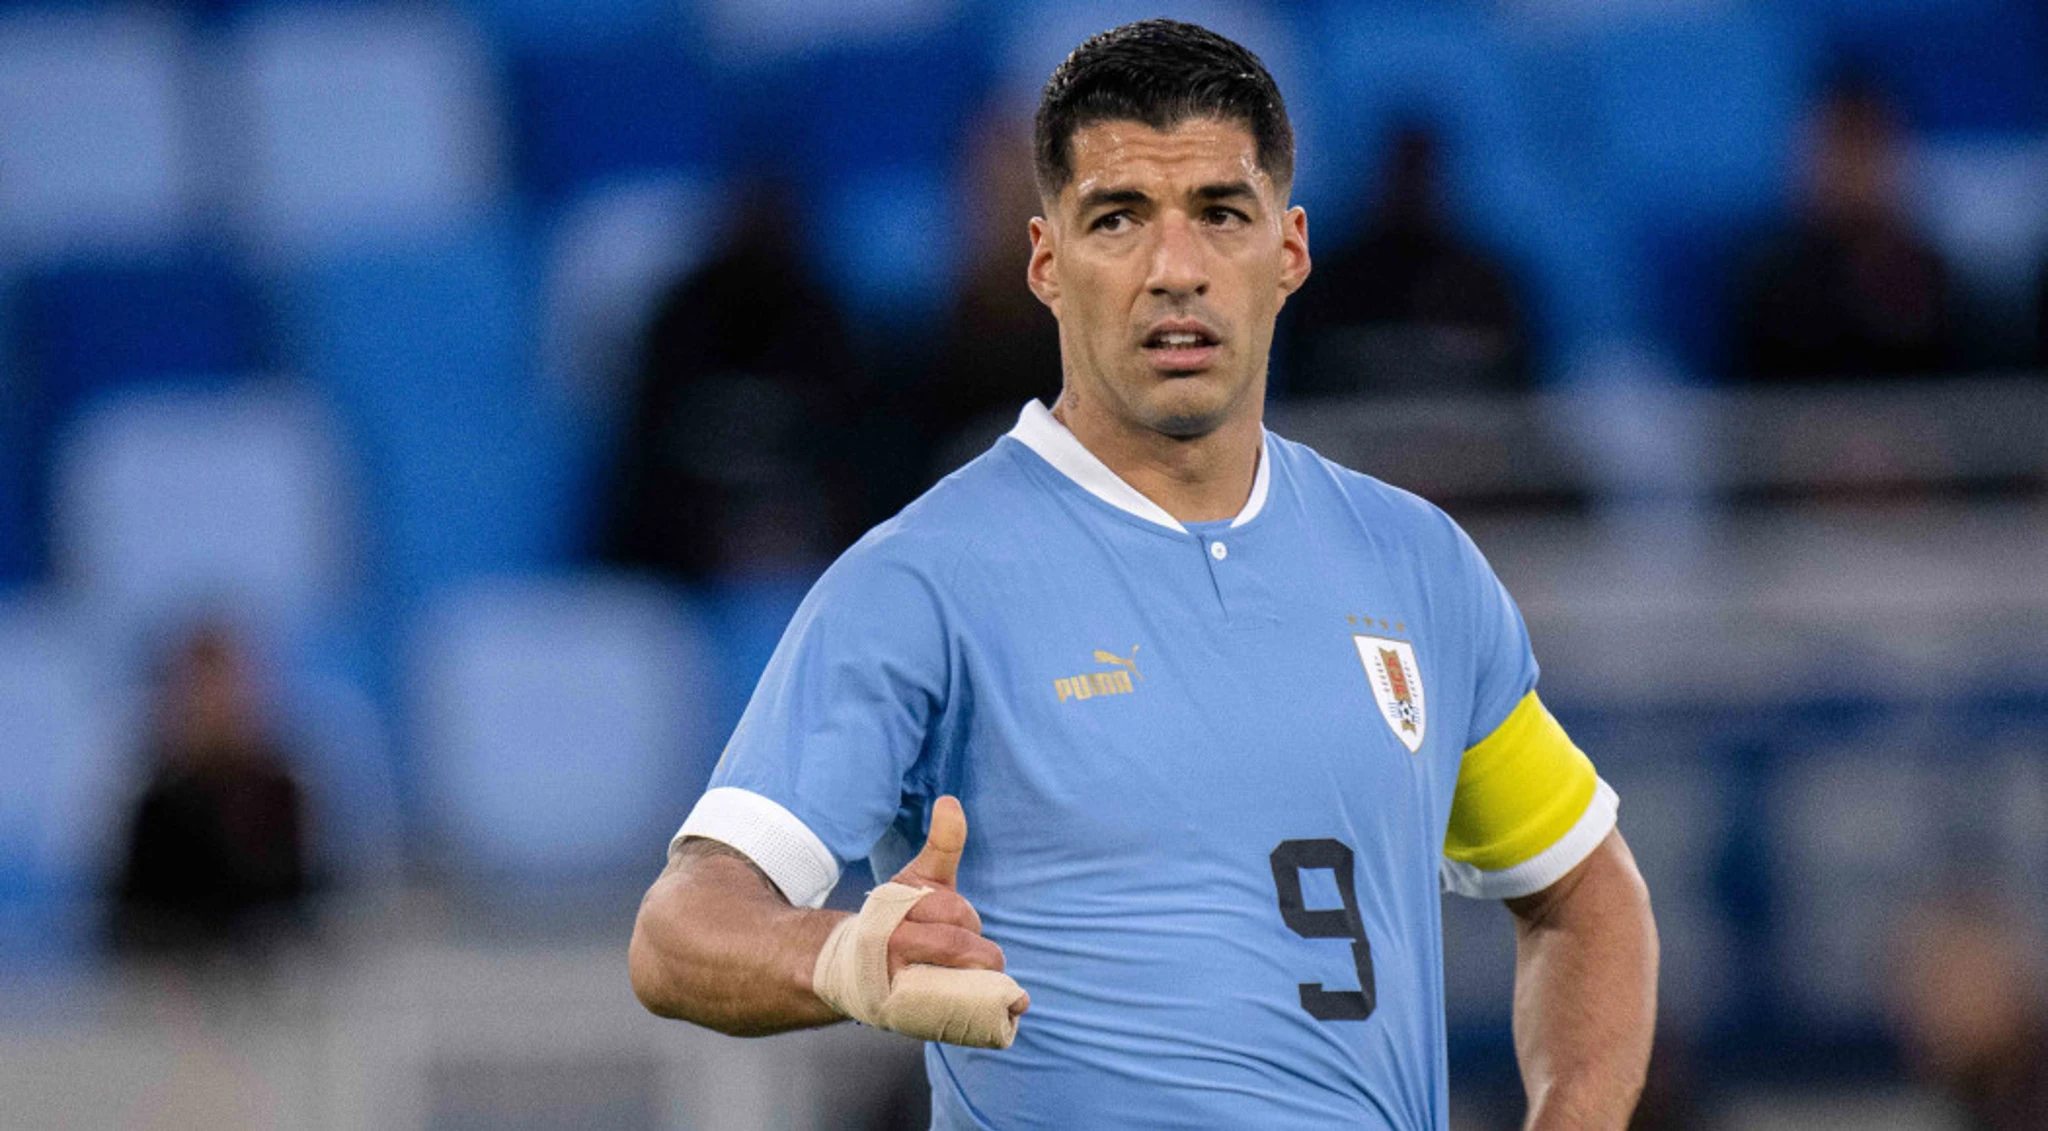 Uruguay World Cup Uniform Is Ridiculously Tight